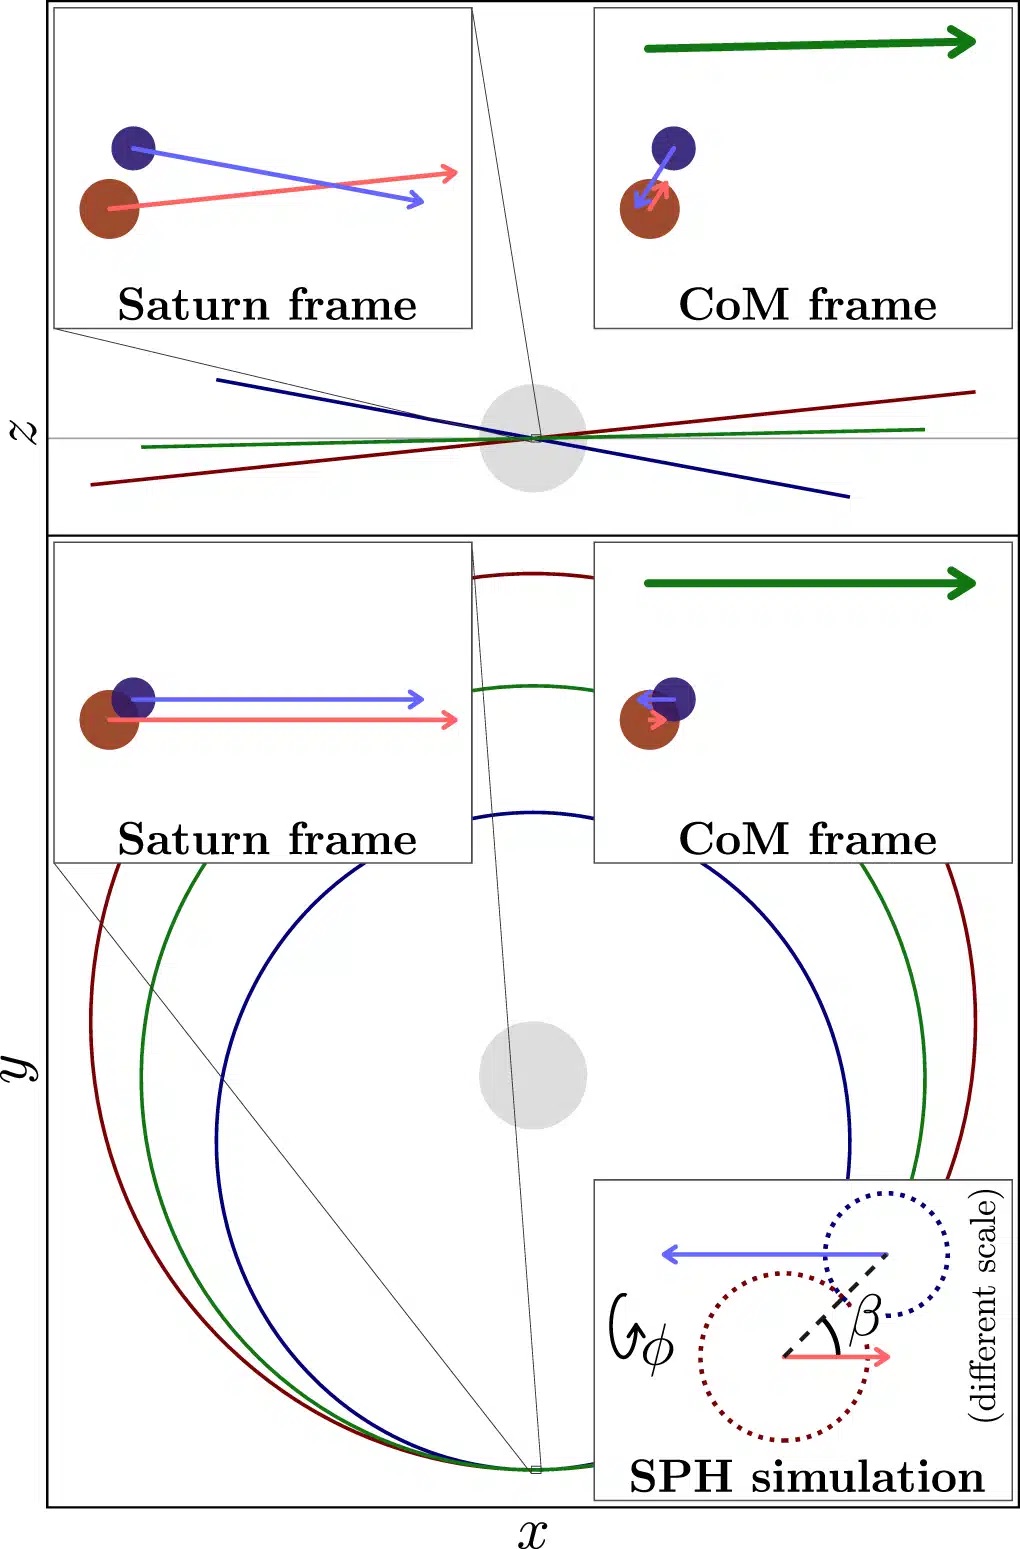 Orbits of p-Rhea and p-Dione around Saturn before an impact, in a specific scenario. Saturn is shown in gray. Zooms detail the velocities of the moons before impact, and a panel illustrates the orientation and velocity for the impact simulation, with a time to impact of 1 hour. L. F. A. Teodoro et al. 2023
